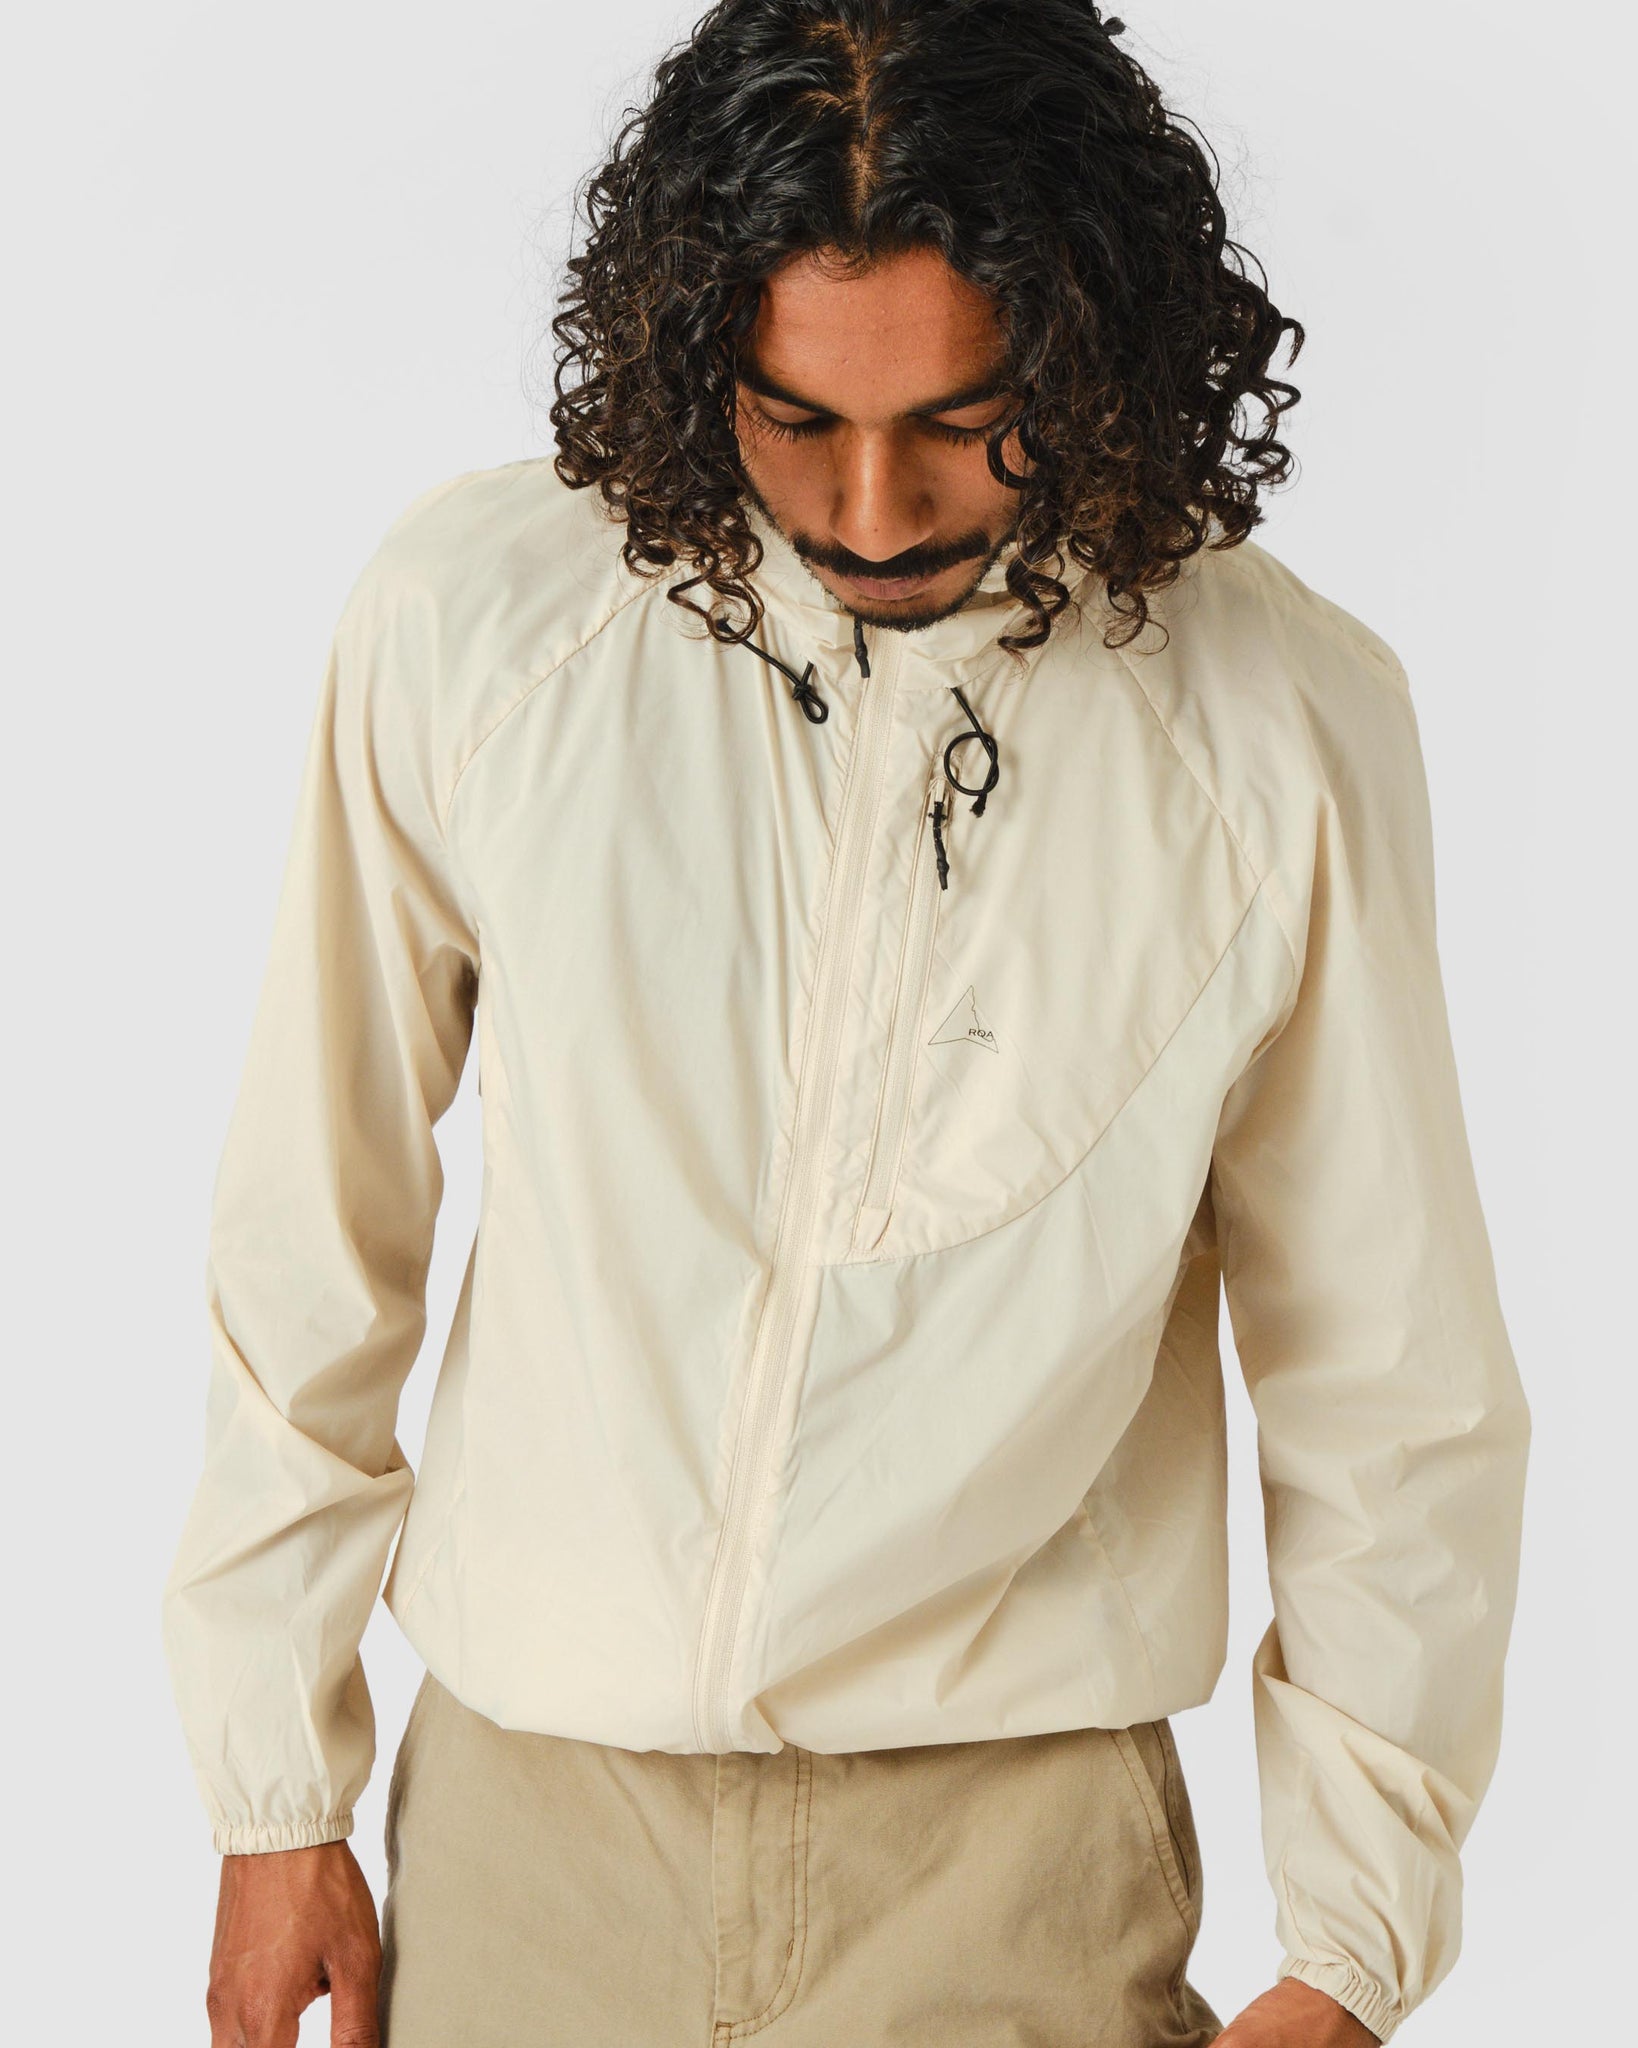 Carry Over Windbreaker - White Reflective